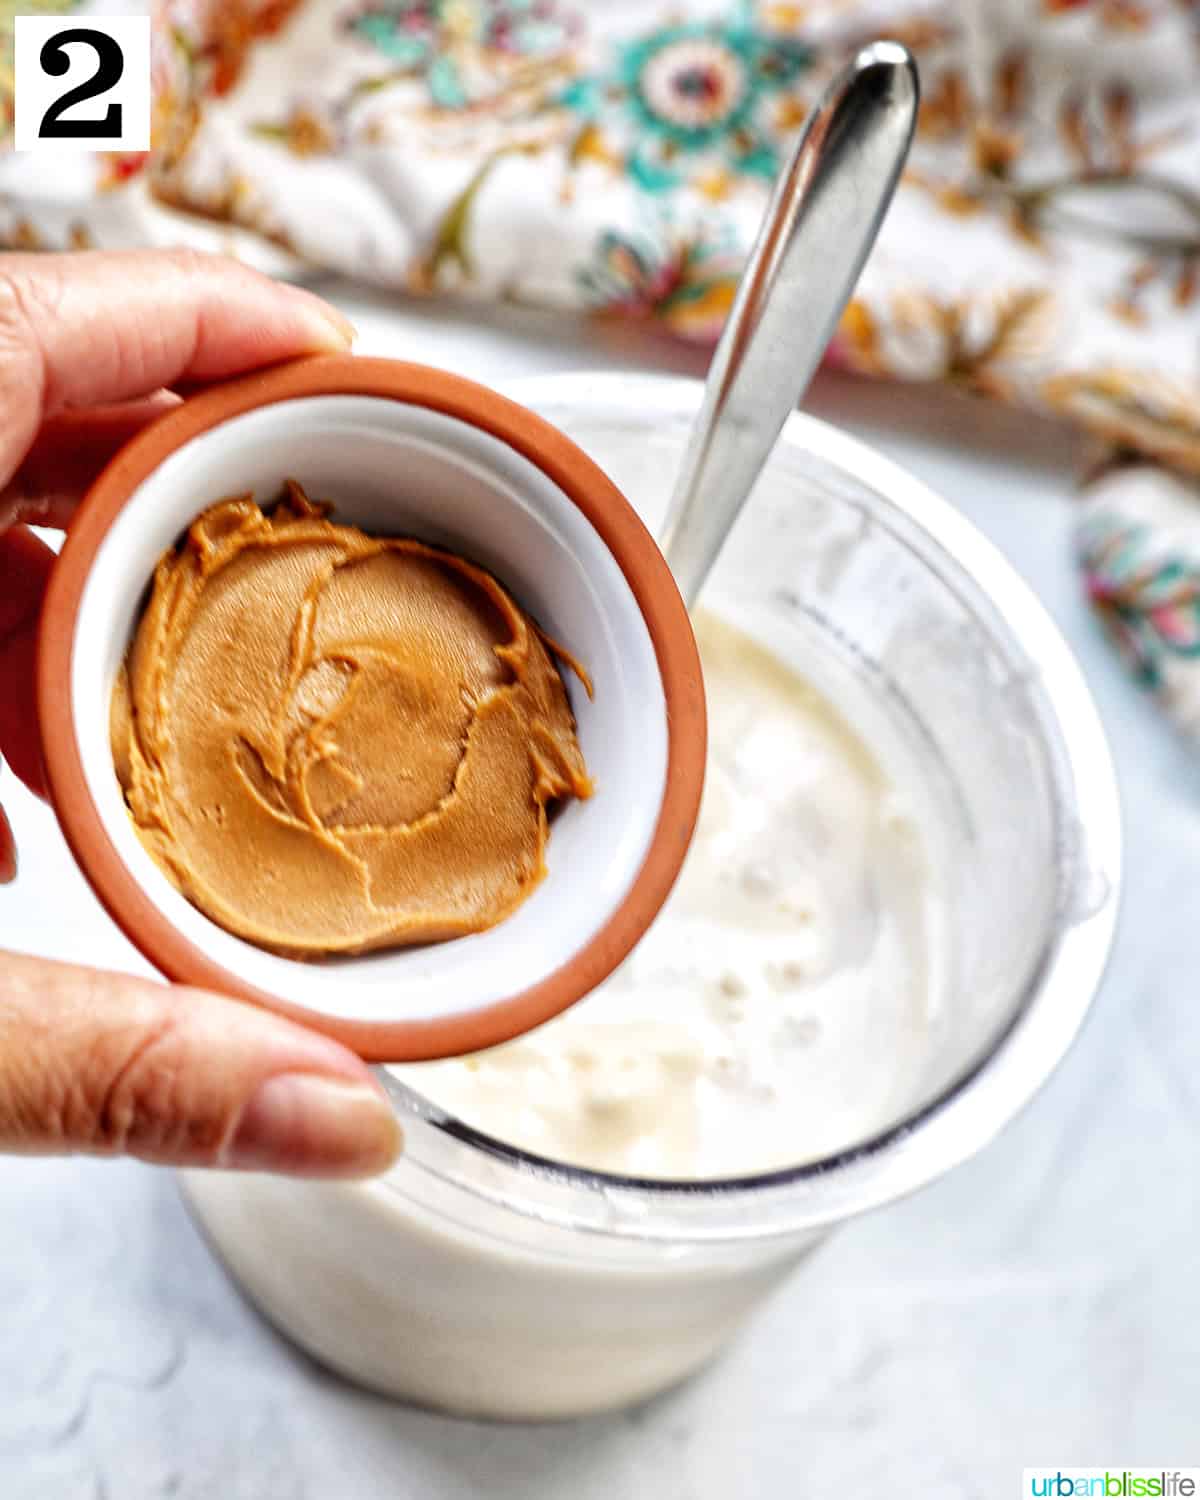 Hand holding a small bowl of Biscoff spread over a pint container of vanilla ice cream.